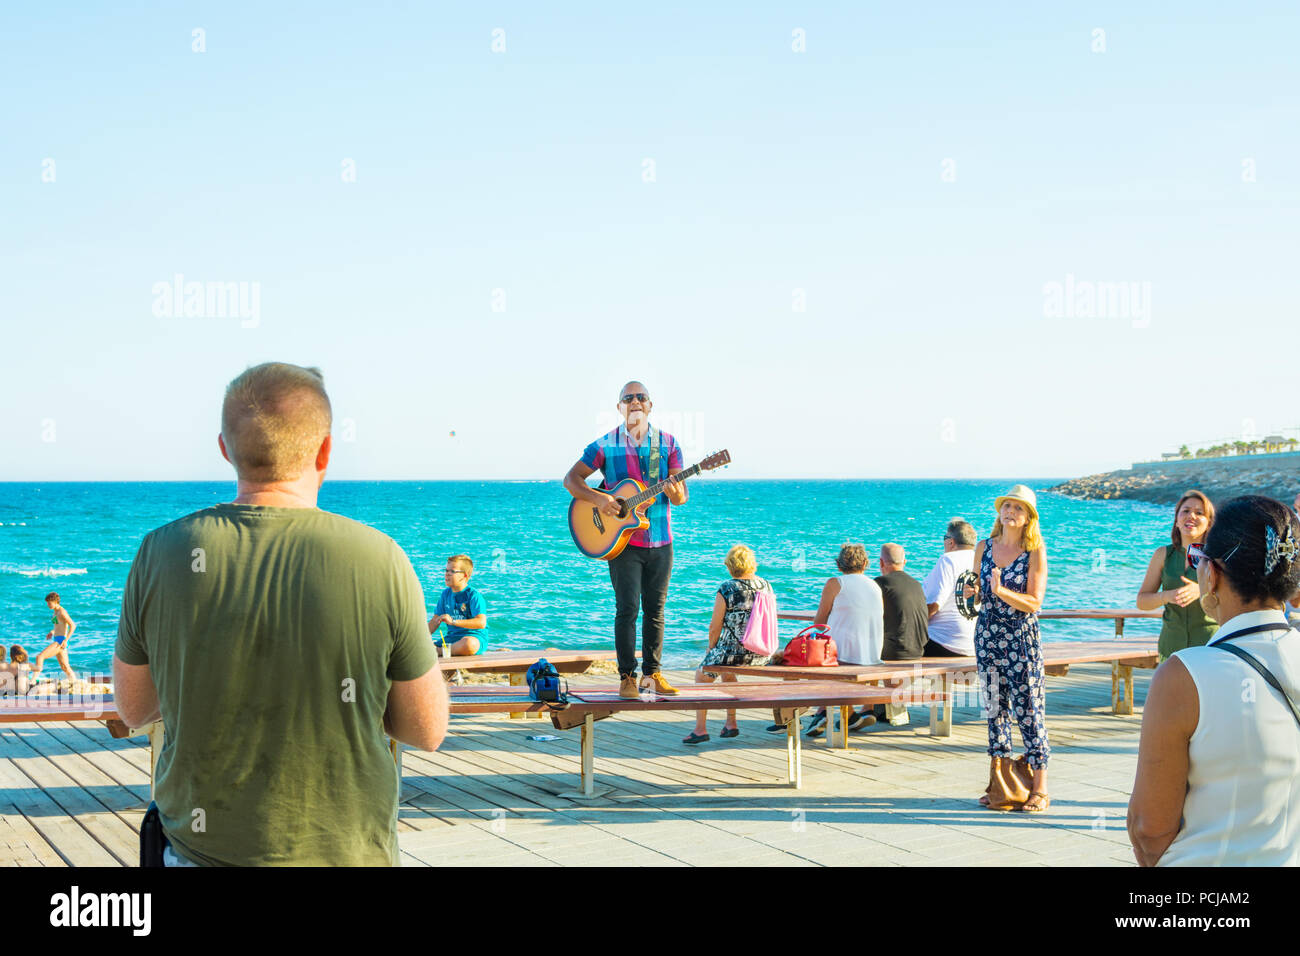 SPAIN, ALICANTE - JULY 28, 2018 Street band performing on seaside boardwalk on sunny summer day. Young man with guitarr singing audience applauding. B Stock Photo